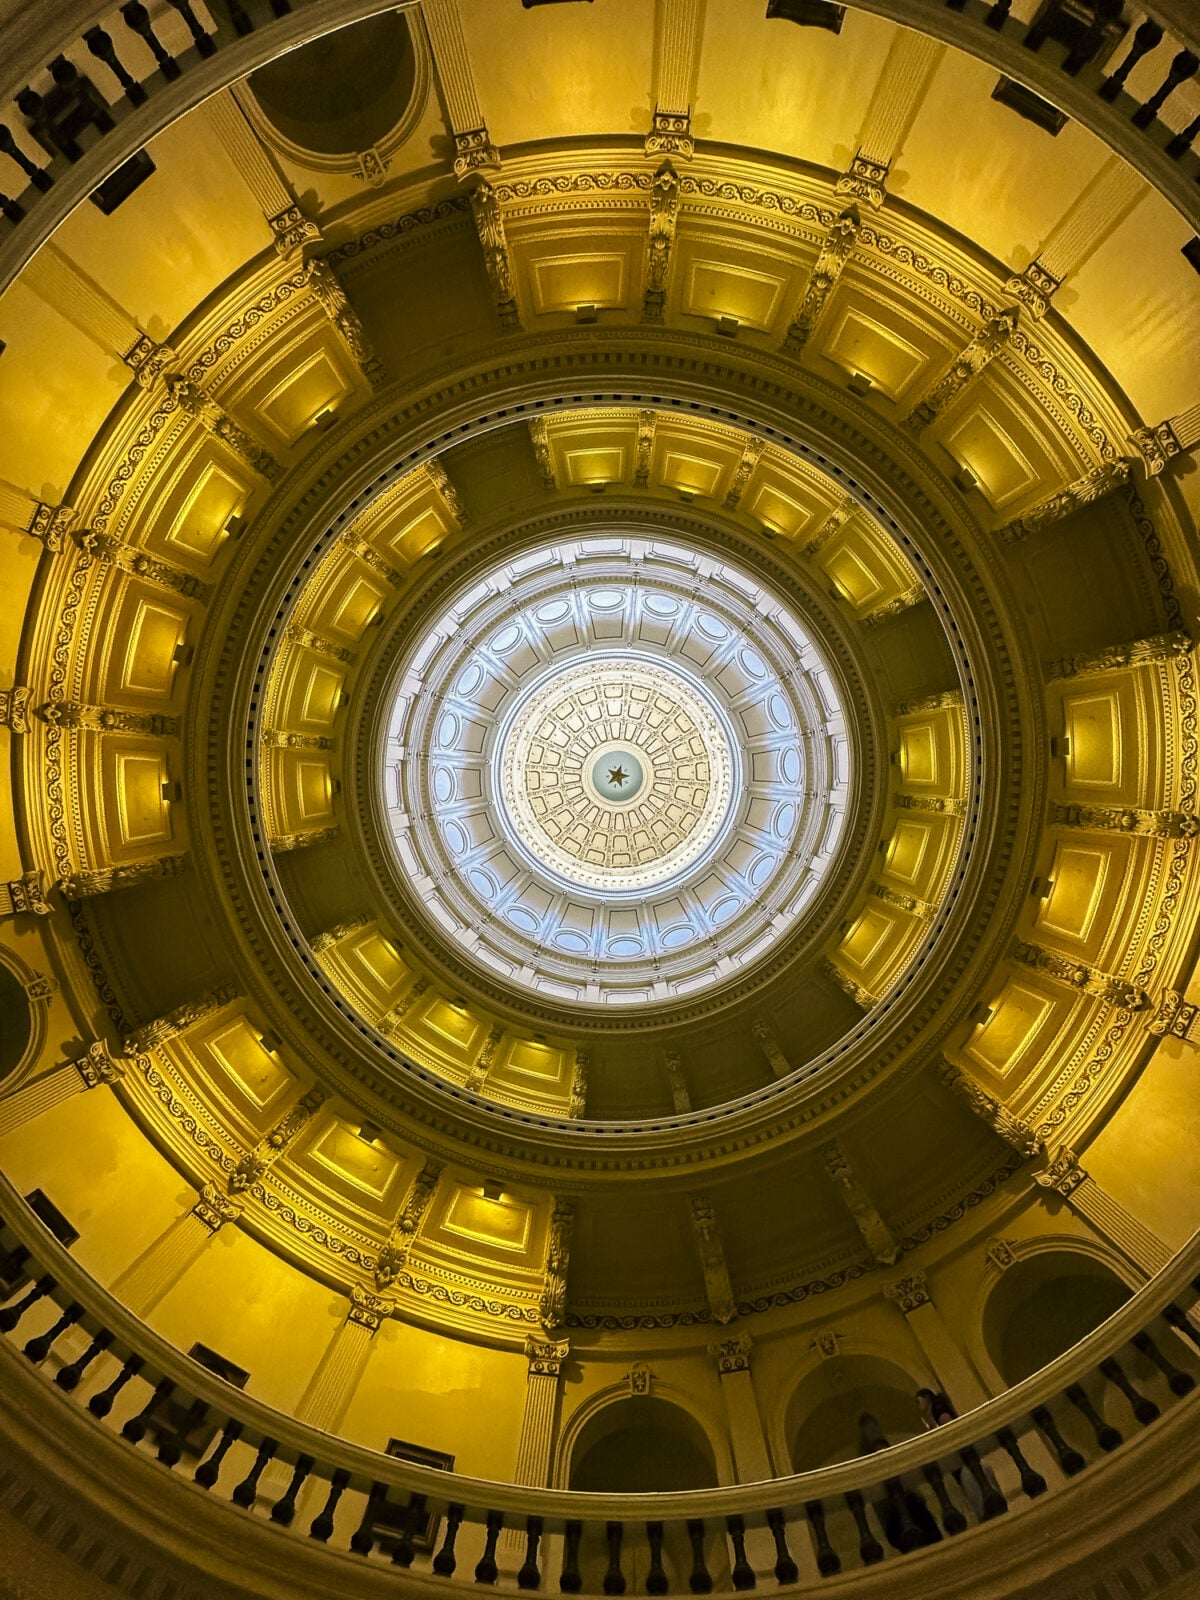 The Texas State Capitol building